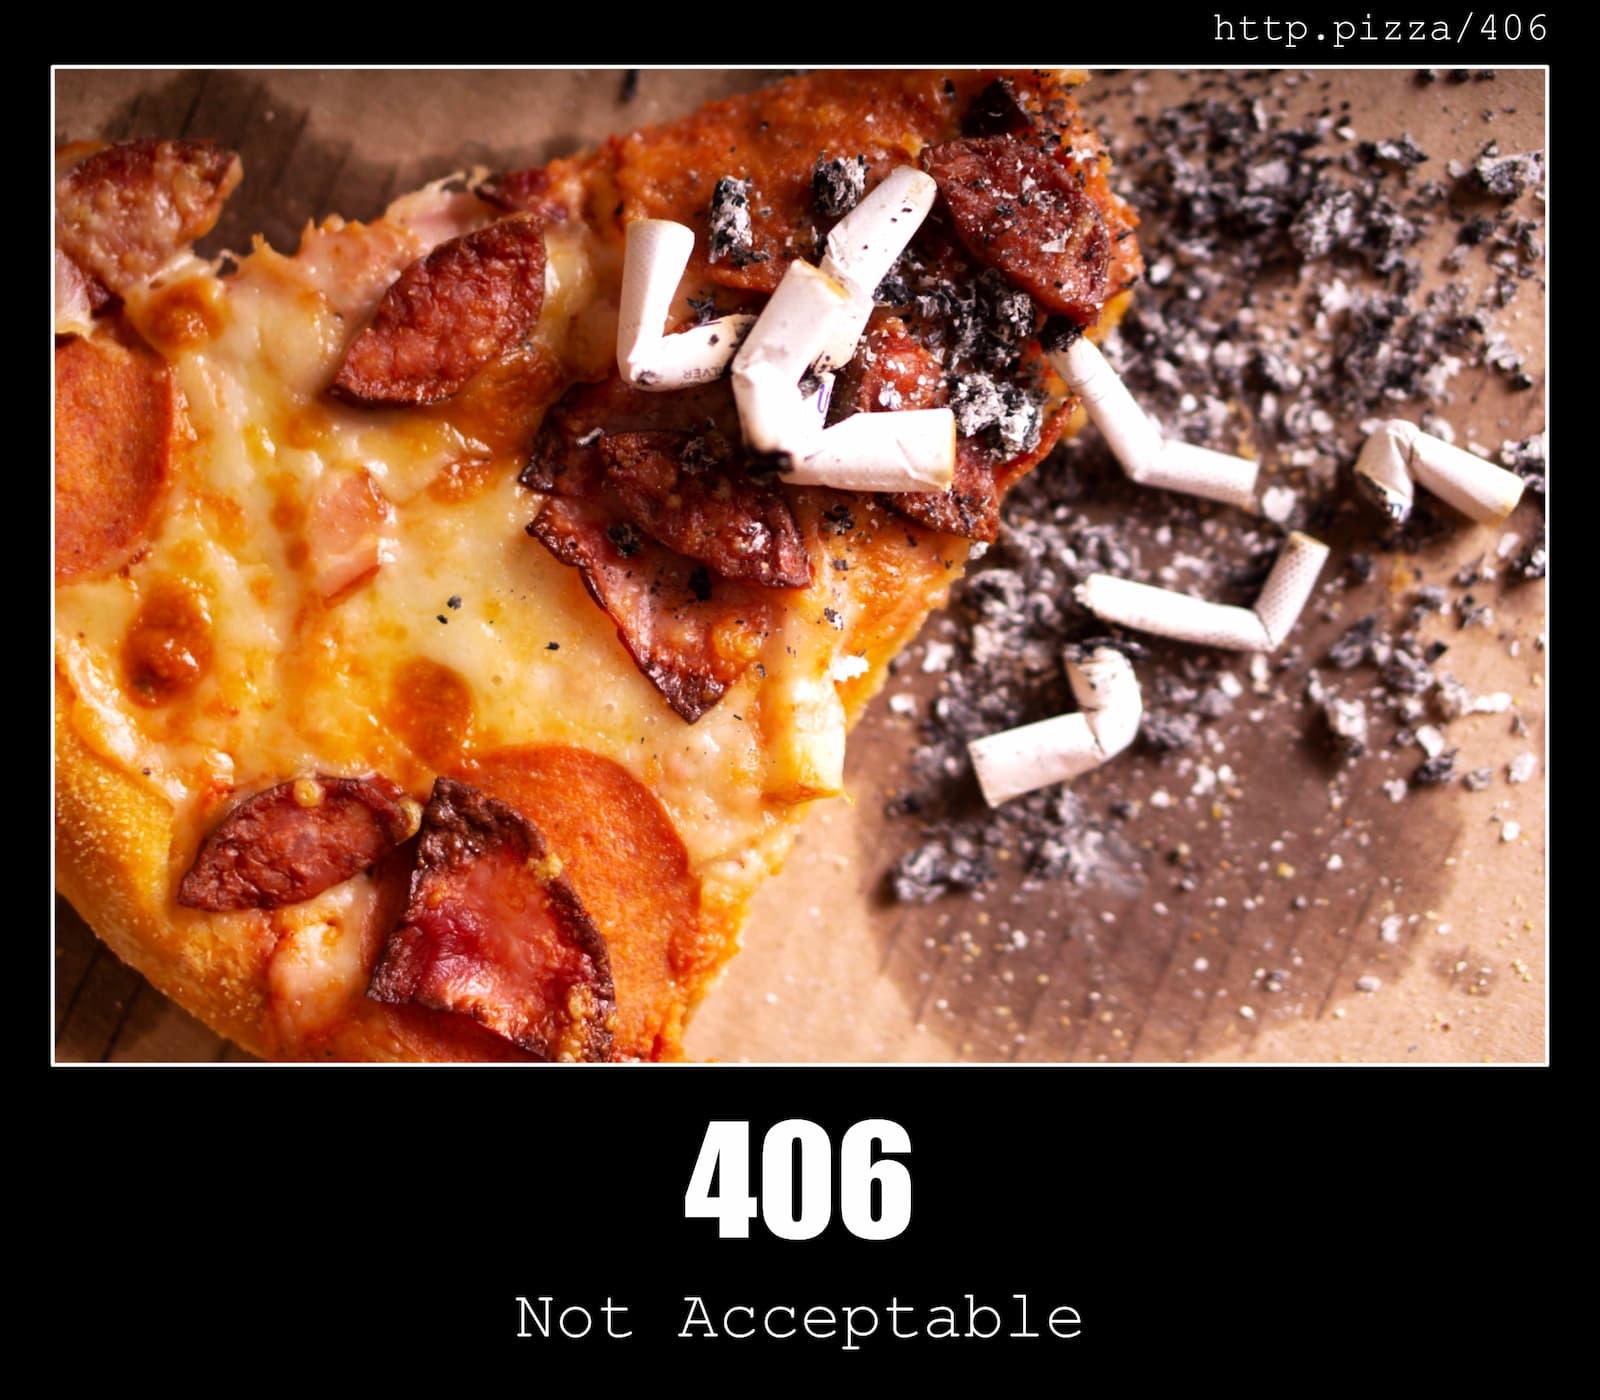 HTTP Status Code 406 Not Acceptable & Pizzas